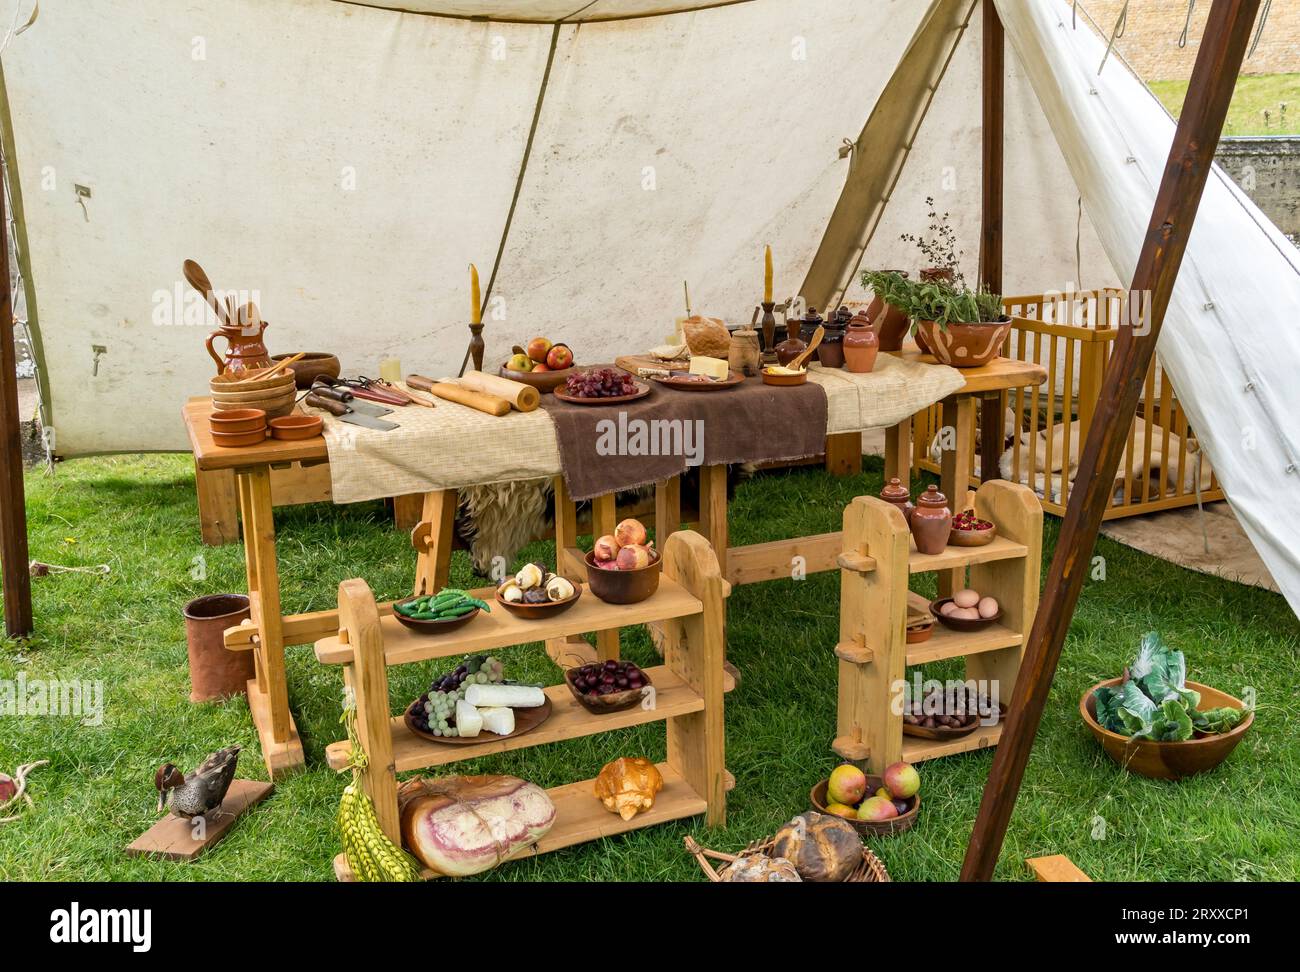 Selection of food items laid out on shelves and table in medieval pots with old kitchen tools under canvas, Jousting event, Lincoln castle, Lincoln Ci Stock Photo